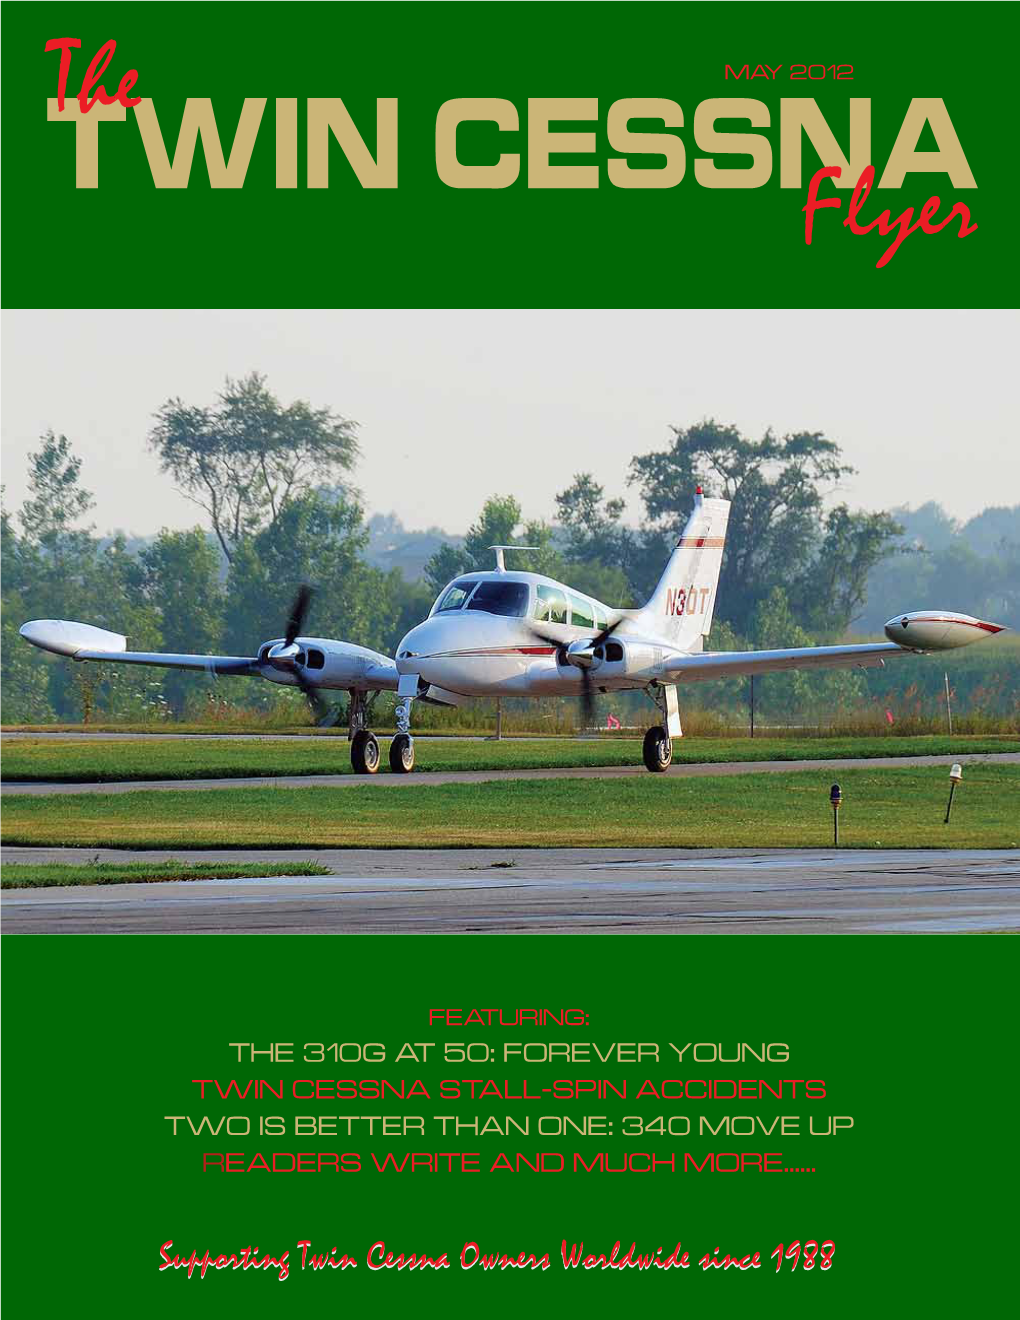 The Twin Cessna Flyer Two Is Better Than